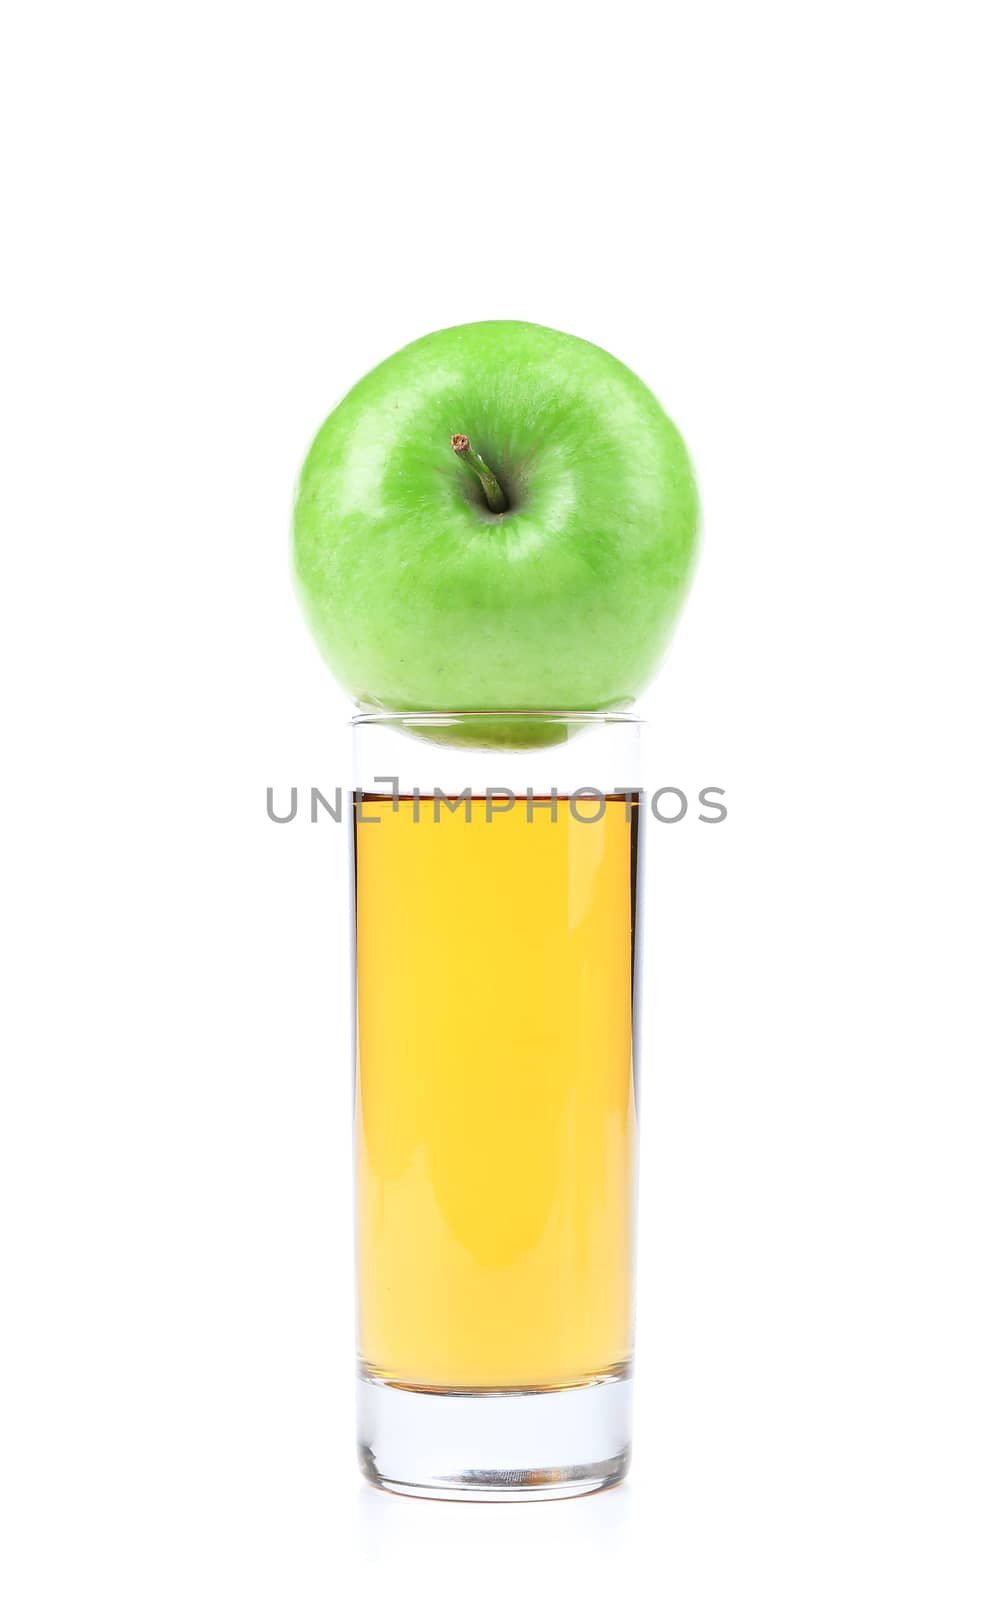 Green apple and juice . White background.